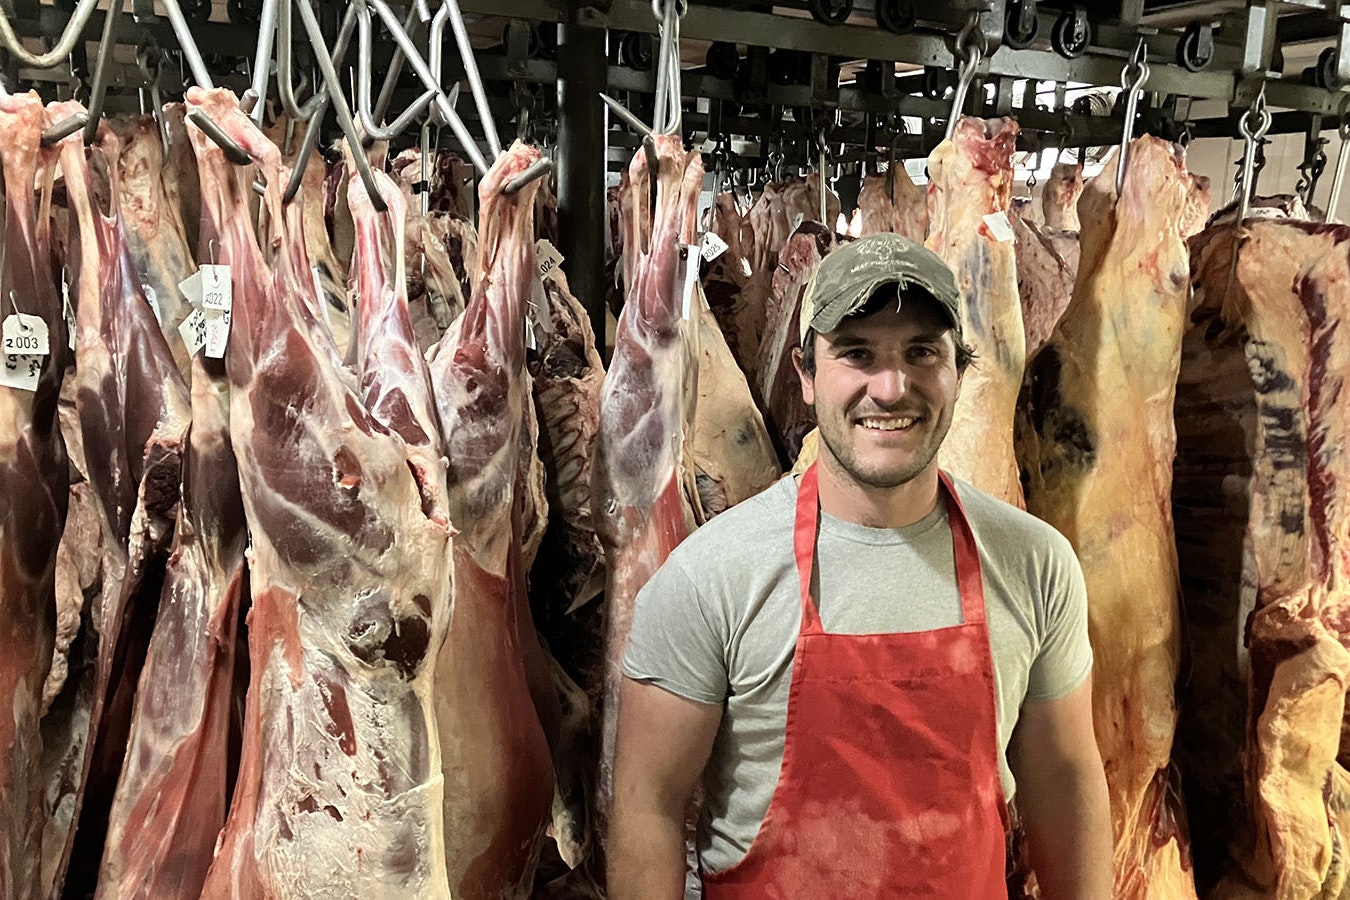 Craig Linden, owner of 307 Meats in Mills, Wyoming, stands in front of hanging meat curing at his facility.